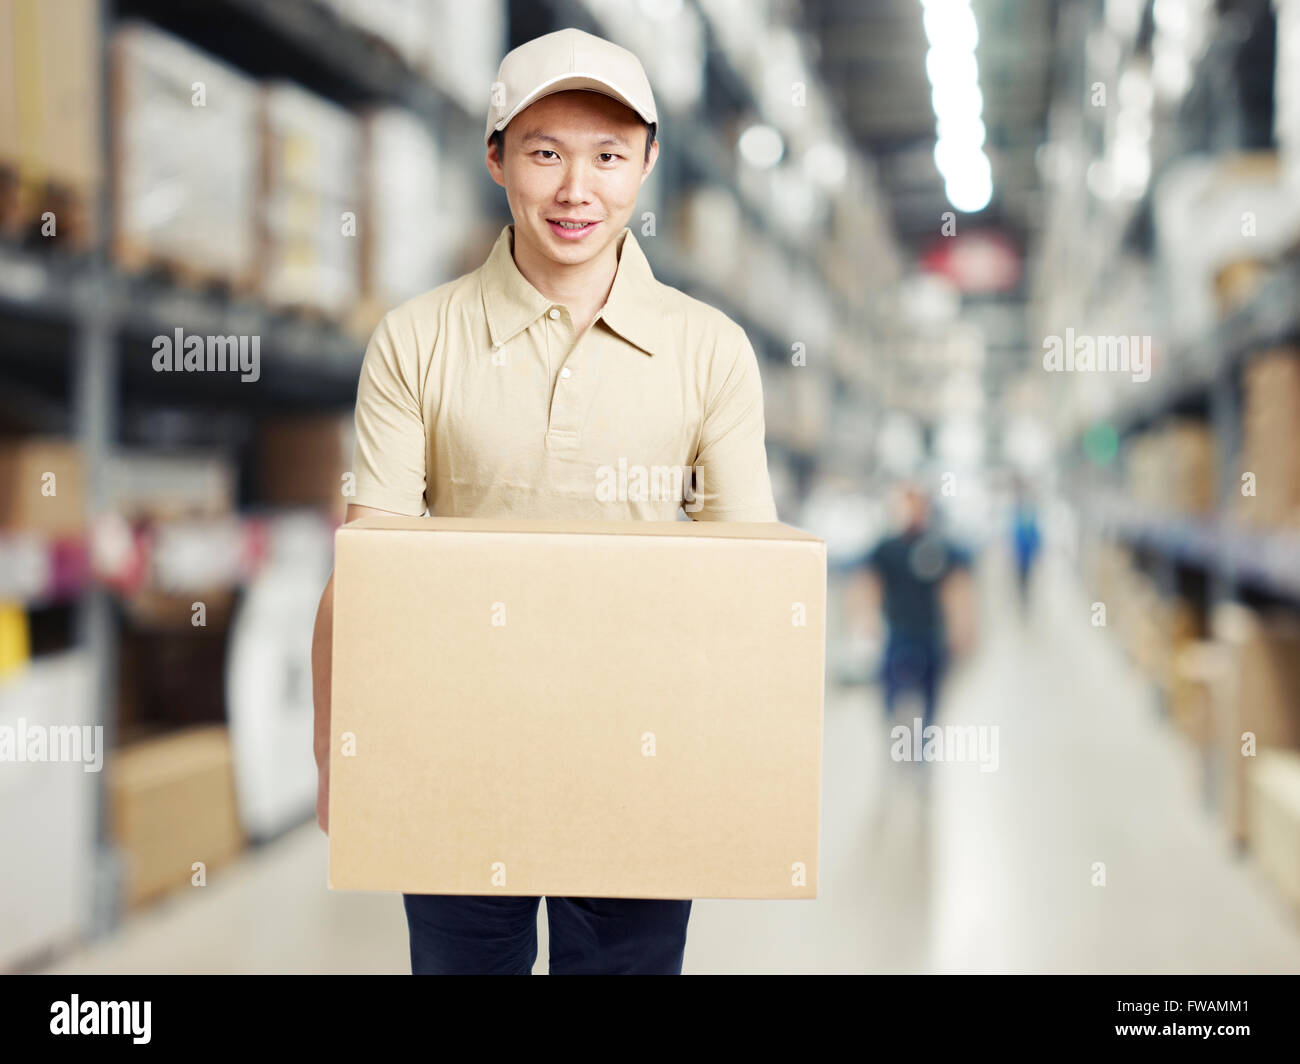 male warehouse worker carrying a carton box of goods Stock Photo